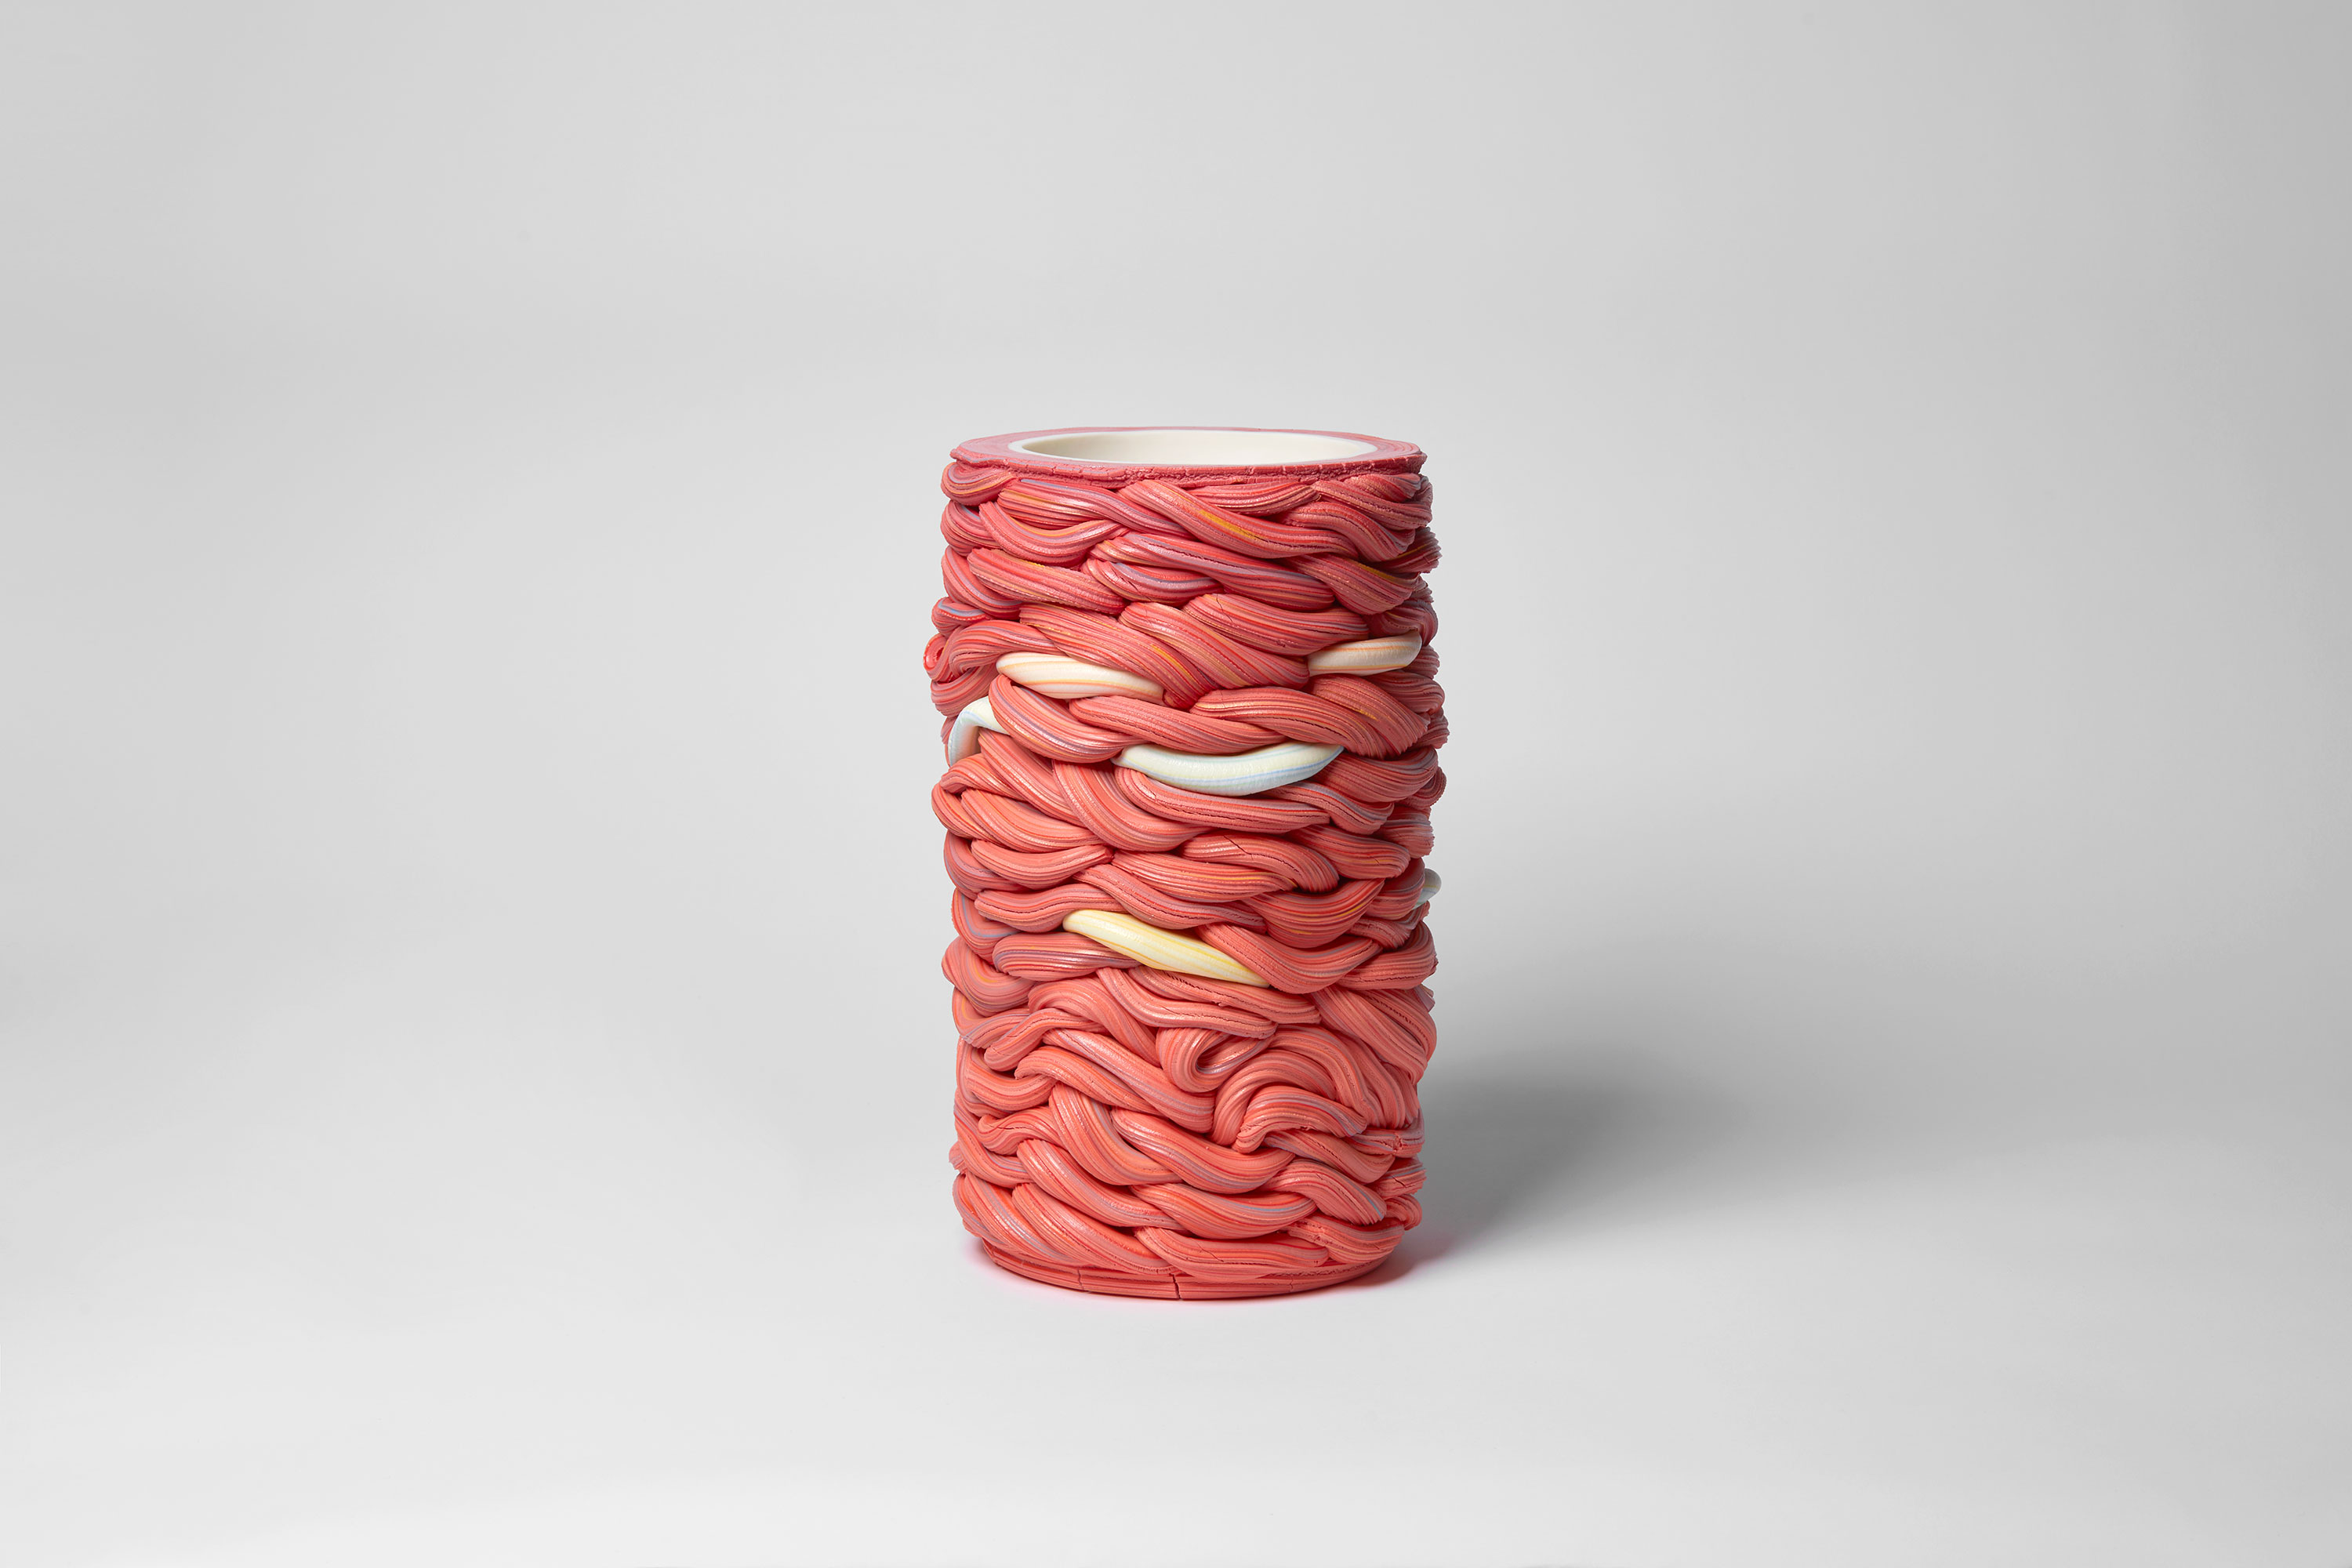 steven-edwards-exhibits-a-series-of-candy-like-ceramic-pieces-for-infinite-folds